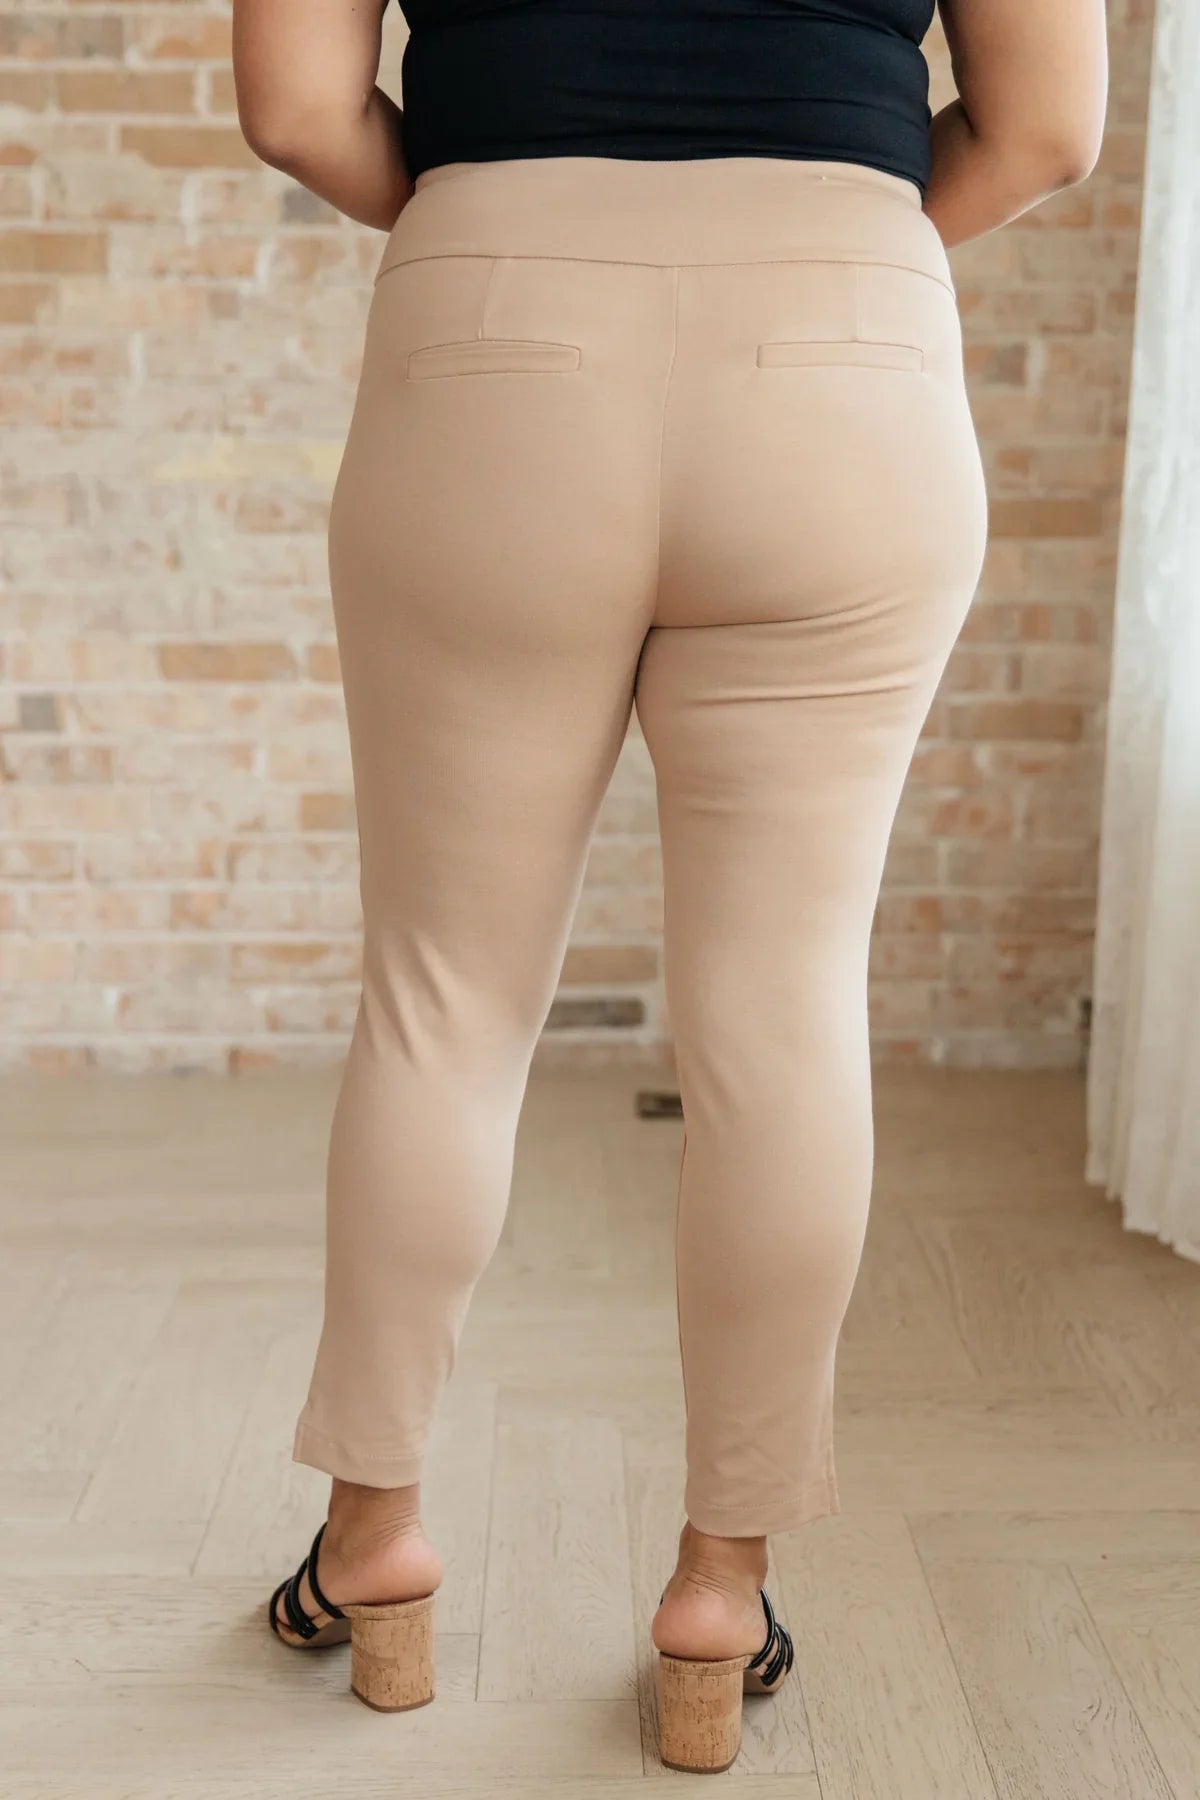 Achieve effortless style and comfort with our Magic Skinny Pants! These high rise pants feature a slim fit and ponte knit for a flattering silhouette